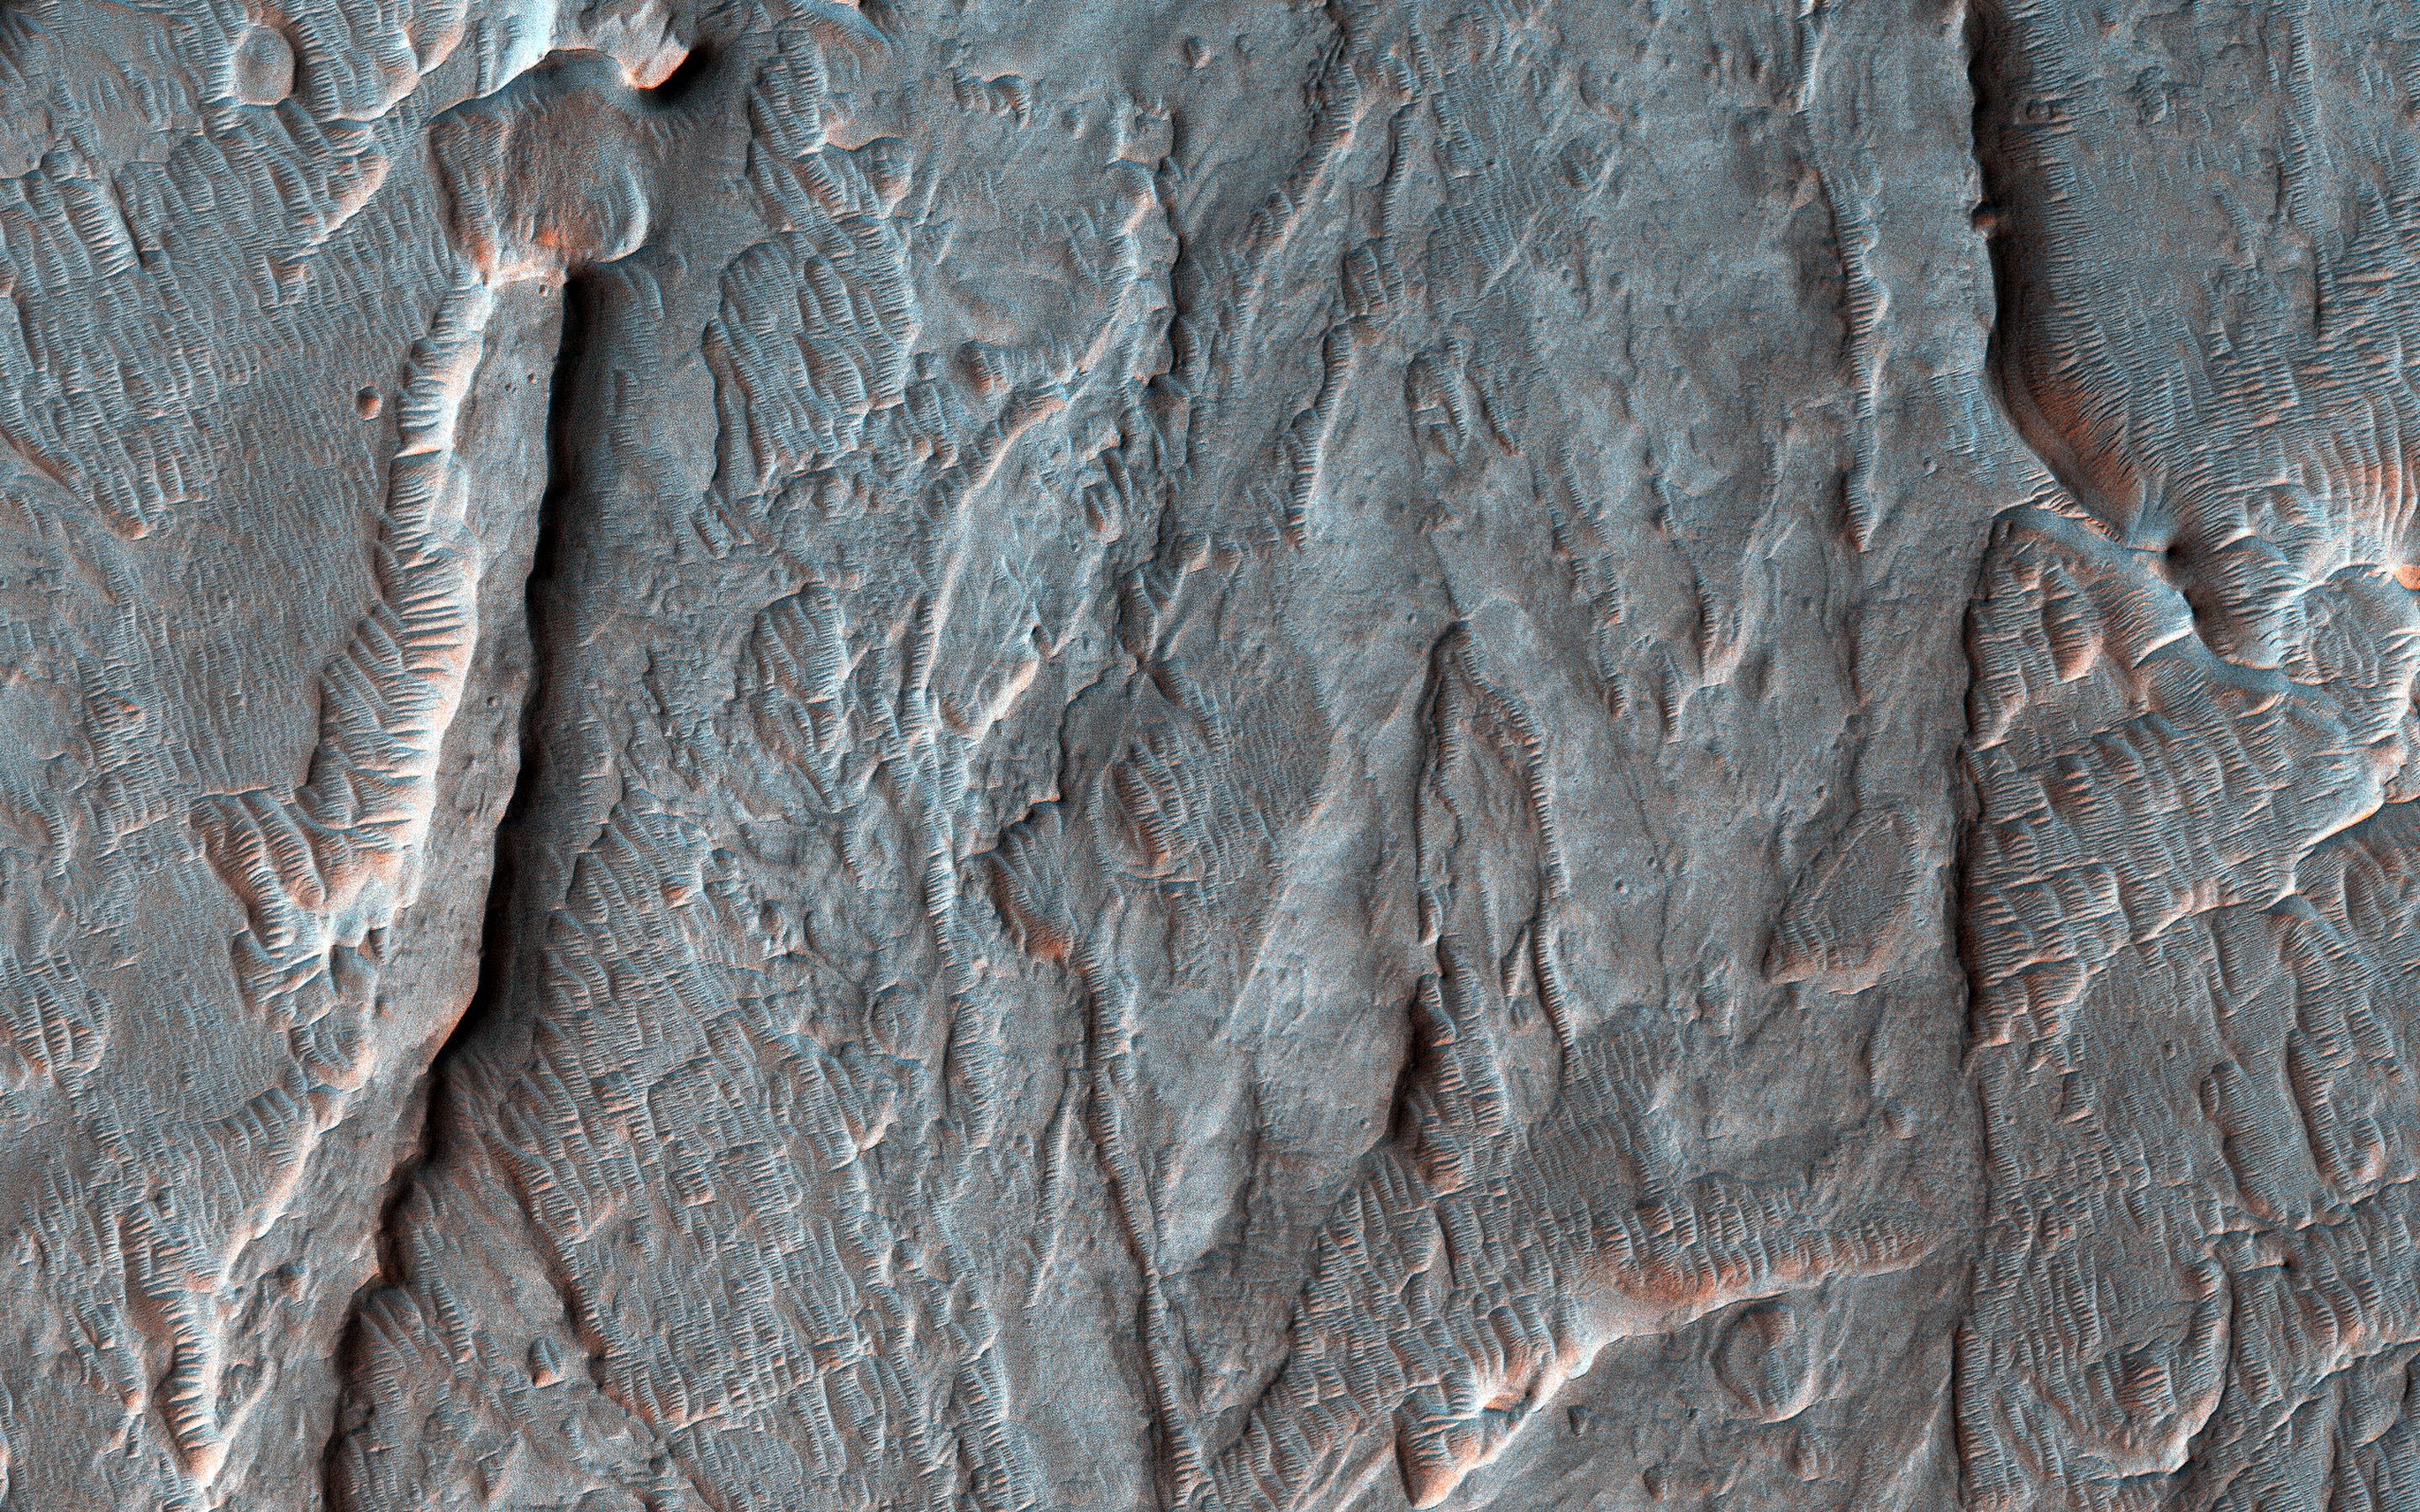 PIA22683: A Fan with Inverted Channels